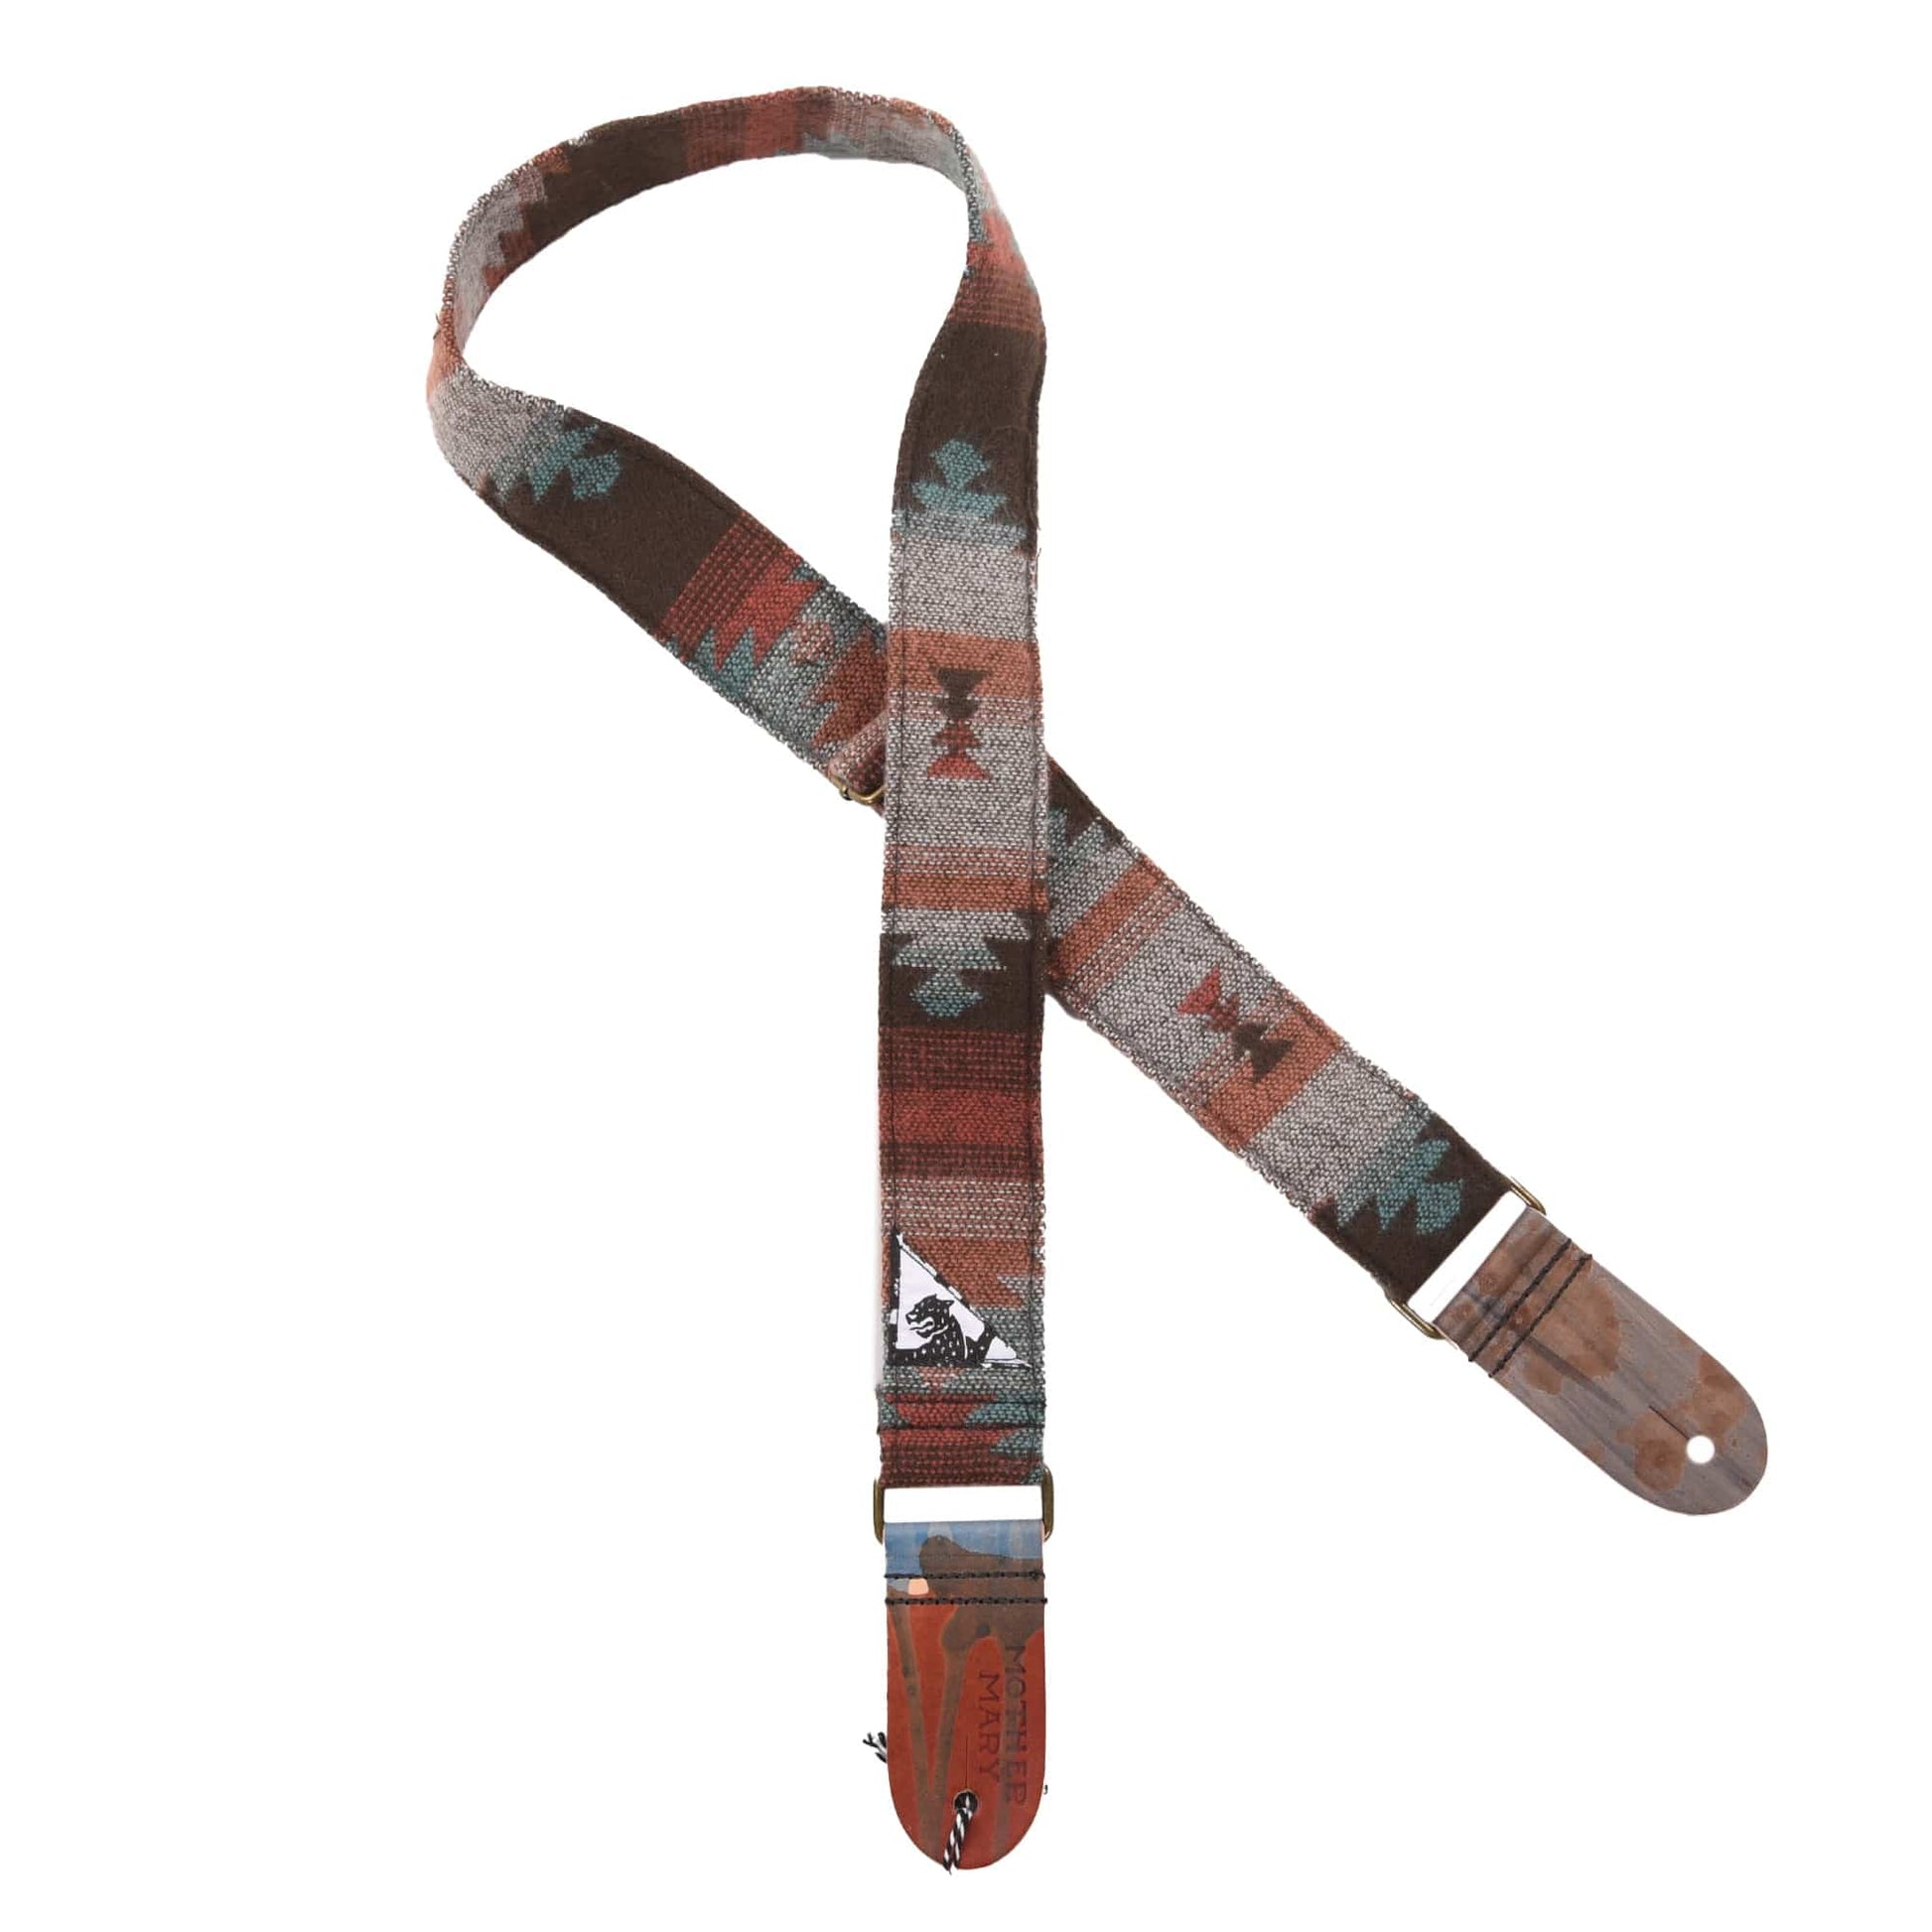 Mother Mary "Appalachian Andy" Guitar Strap Accessories / Straps